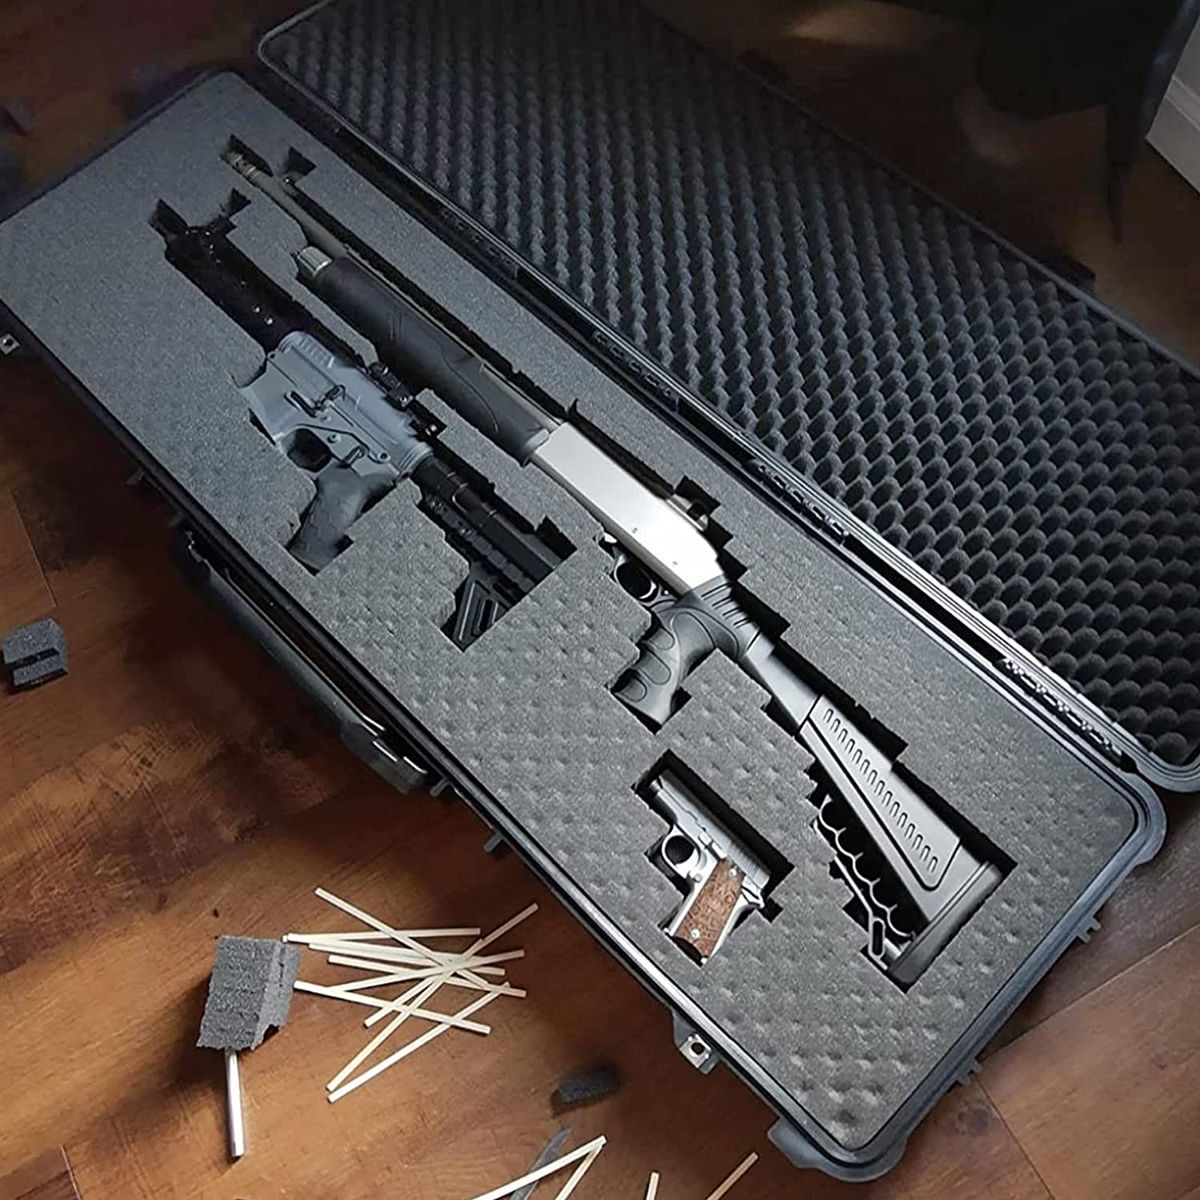 A tactical gun case with a shotgun with a pistol grip stock, a pistol, and a AR15 pistol all in one case.